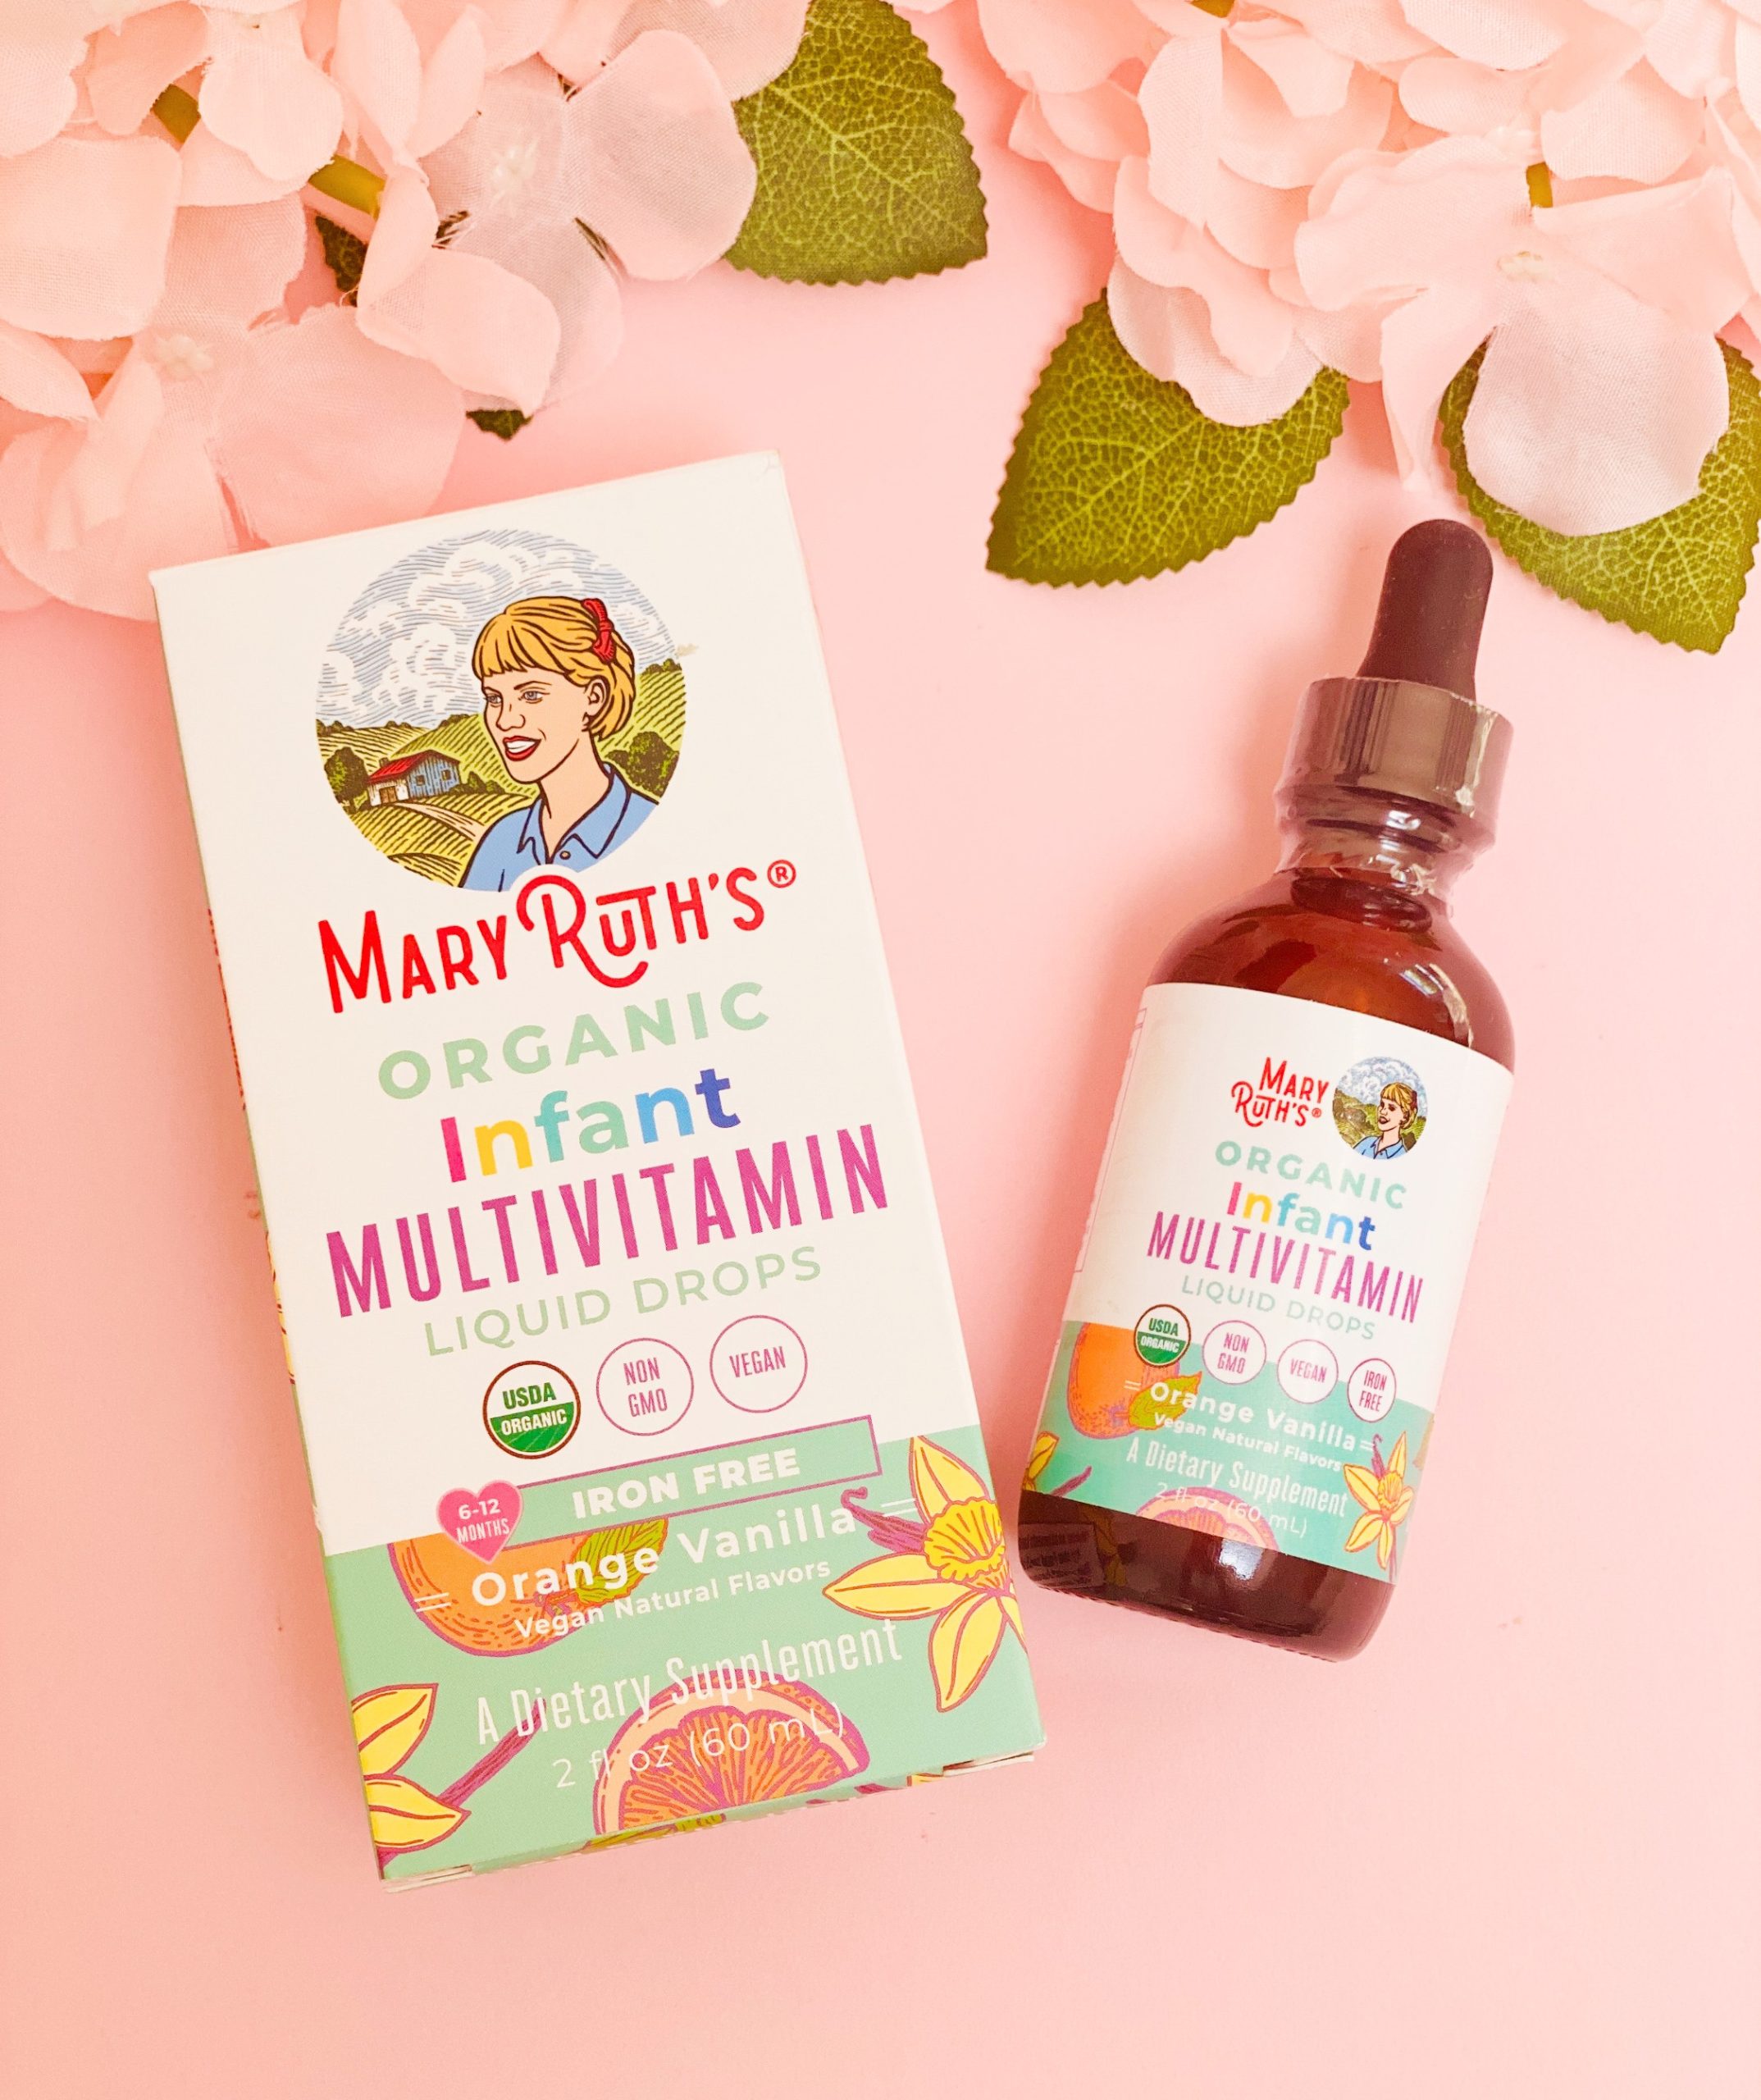 Mary Ruth's Organic Infant Multivitamin review and promo code